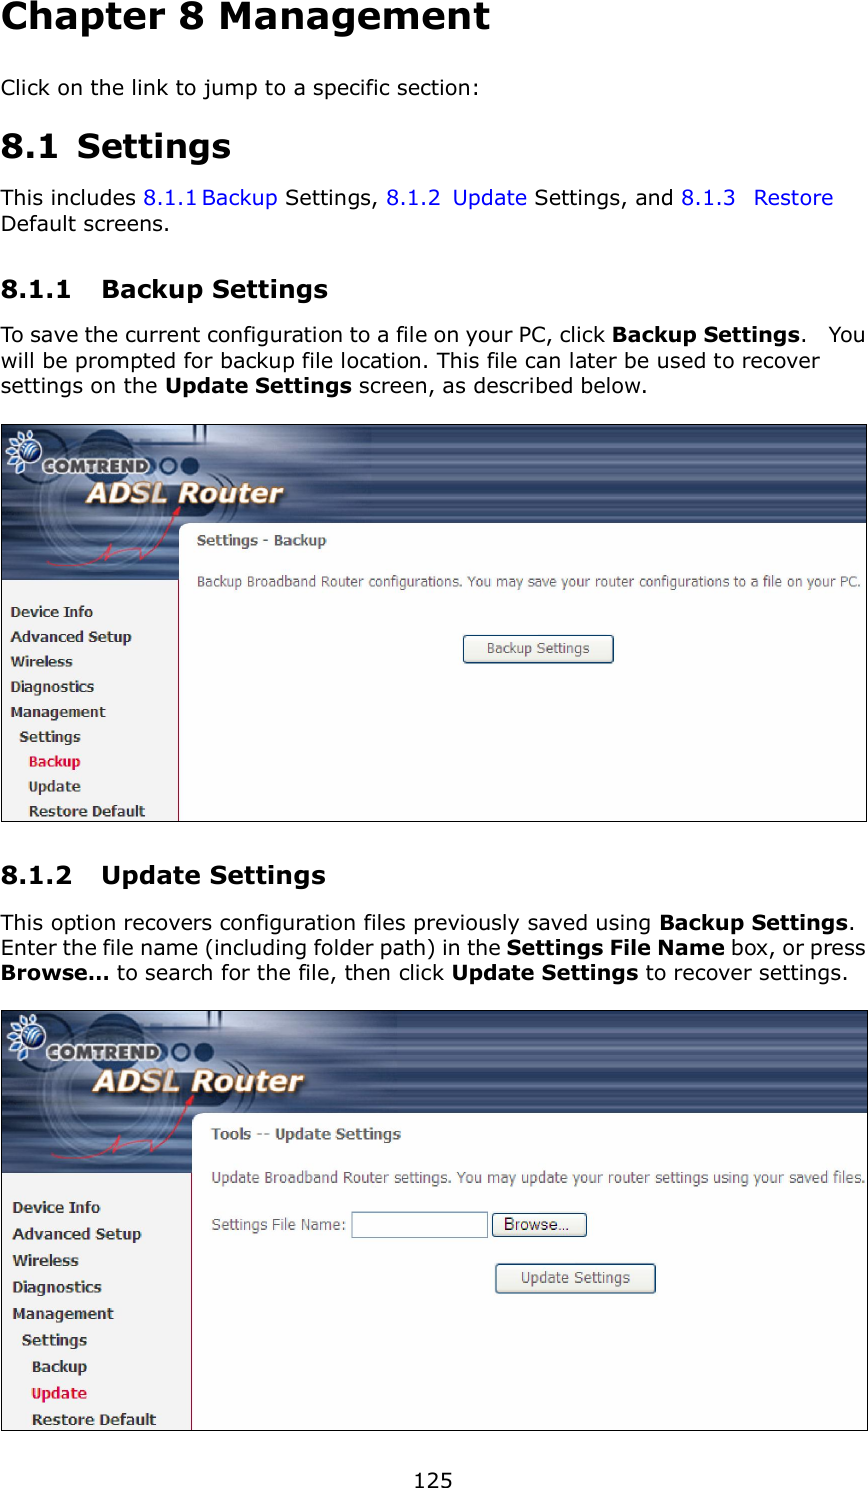  125 Chapter 8 Management Click on the link to jump to a specific section:  8.1  Settings This includes 8.1.1 Backup Settings, 8.1.2  Update Settings, and 8.1.3  Restore Default screens. 8.1.1  Backup Settings   To save the current configuration to a file on your PC, click Backup Settings.    You will be prompted for backup file location. This file can later be used to recover settings on the Update Settings screen, as described below.     8.1.2  Update Settings This option recovers configuration files previously saved using Backup Settings.   Enter the file name (including folder path) in the Settings File Name box, or press Browse… to search for the file, then click Update Settings to recover settings.   